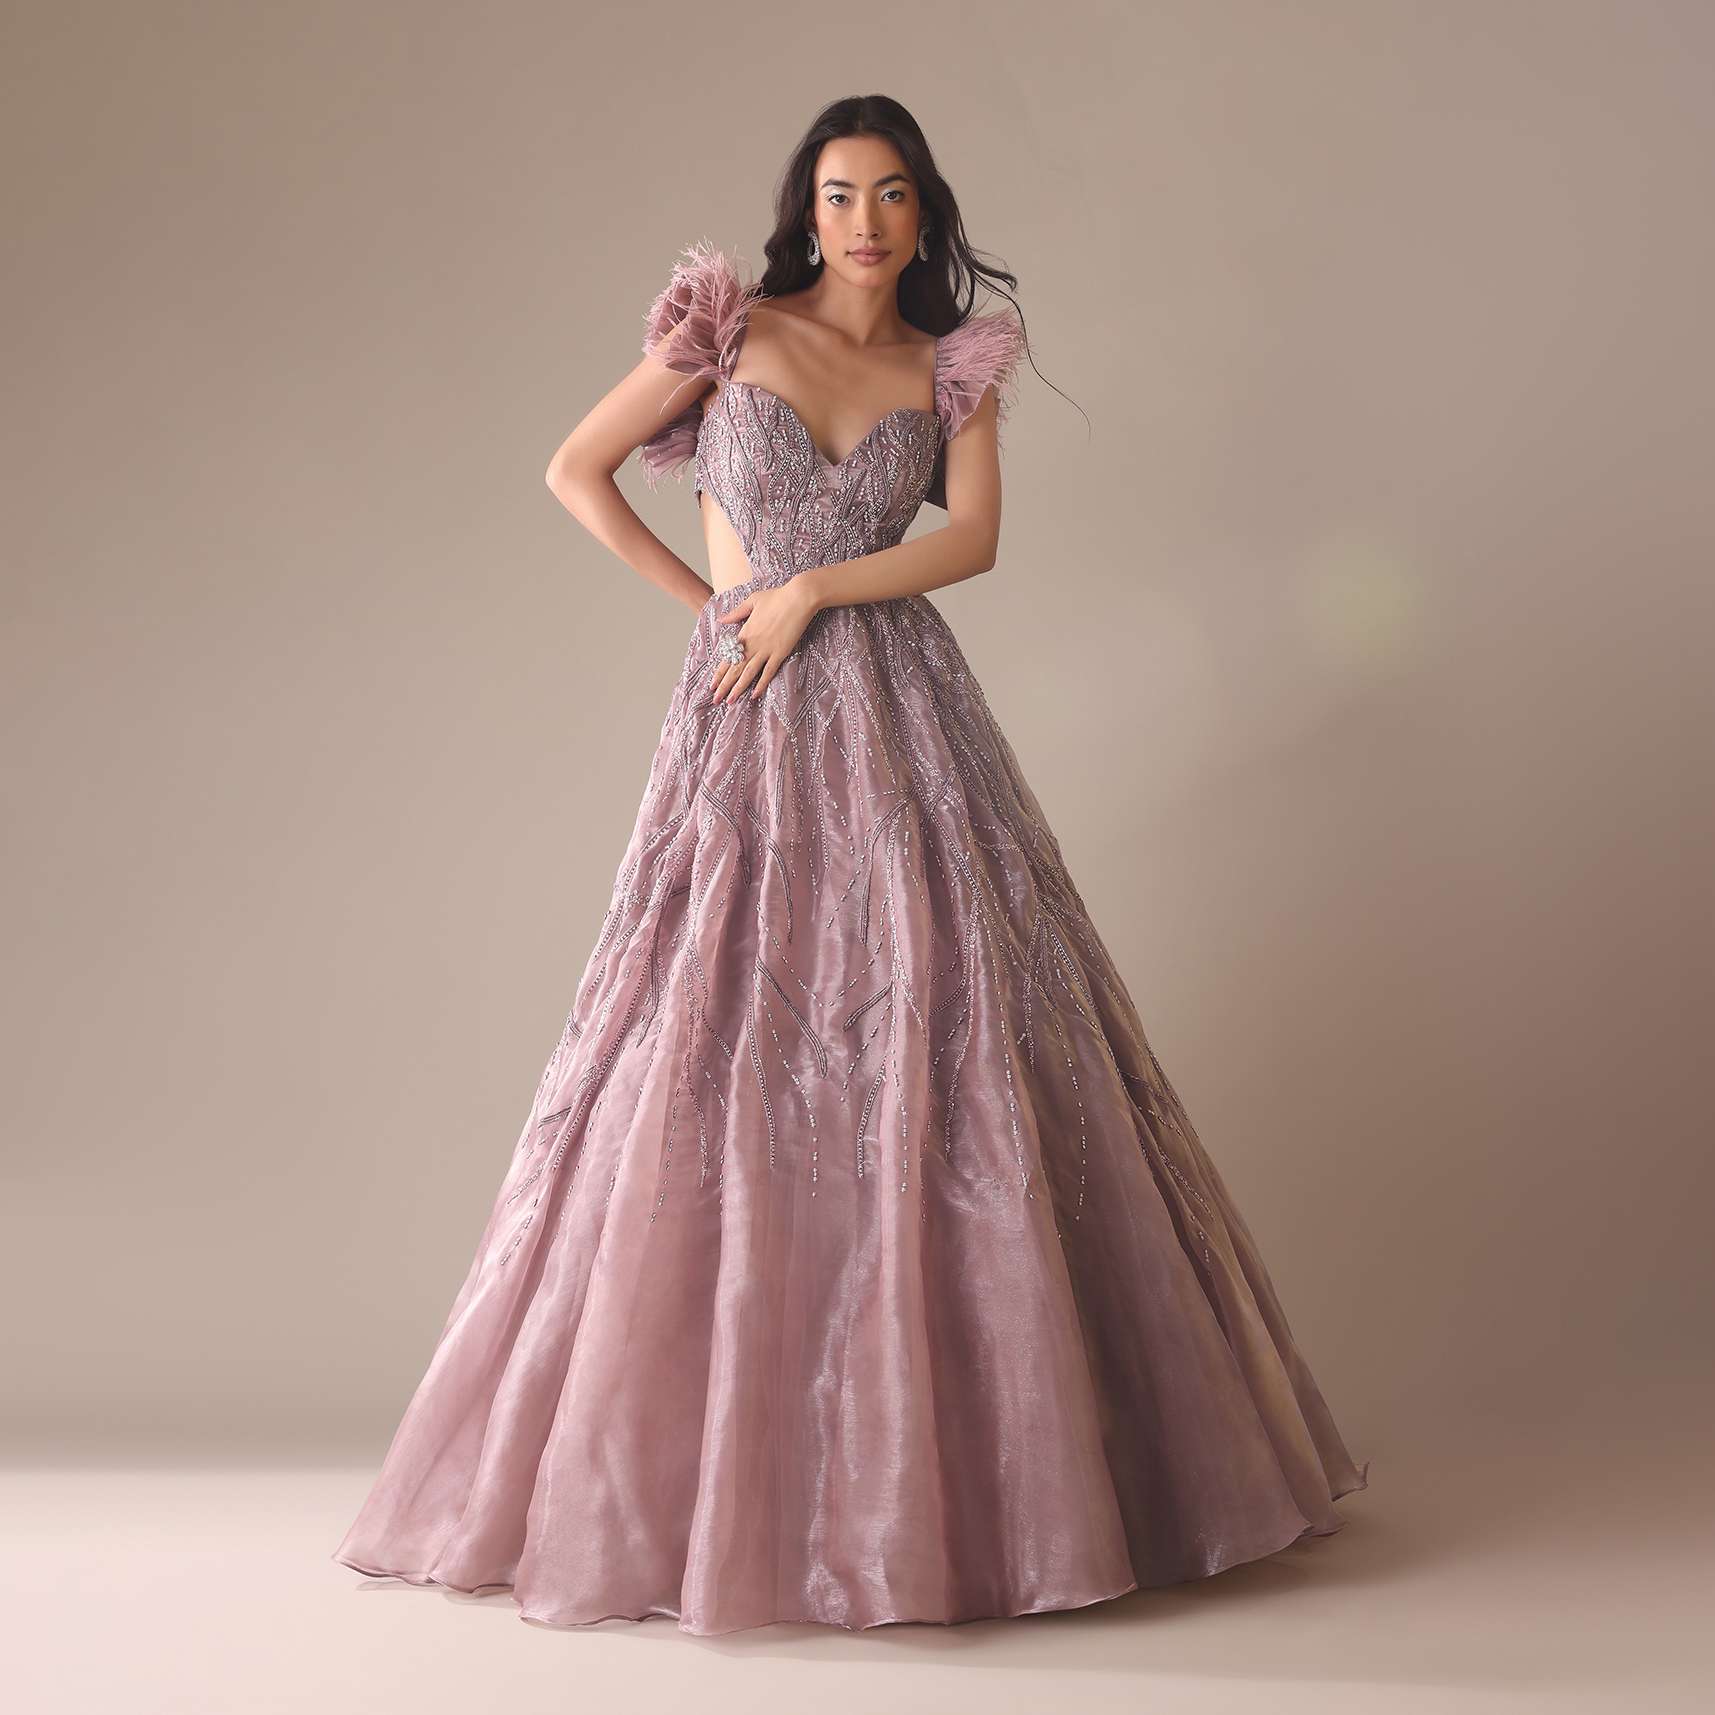 Onion Pink Bridal Gown With Feathered Sleeves And Heavy Embroidery